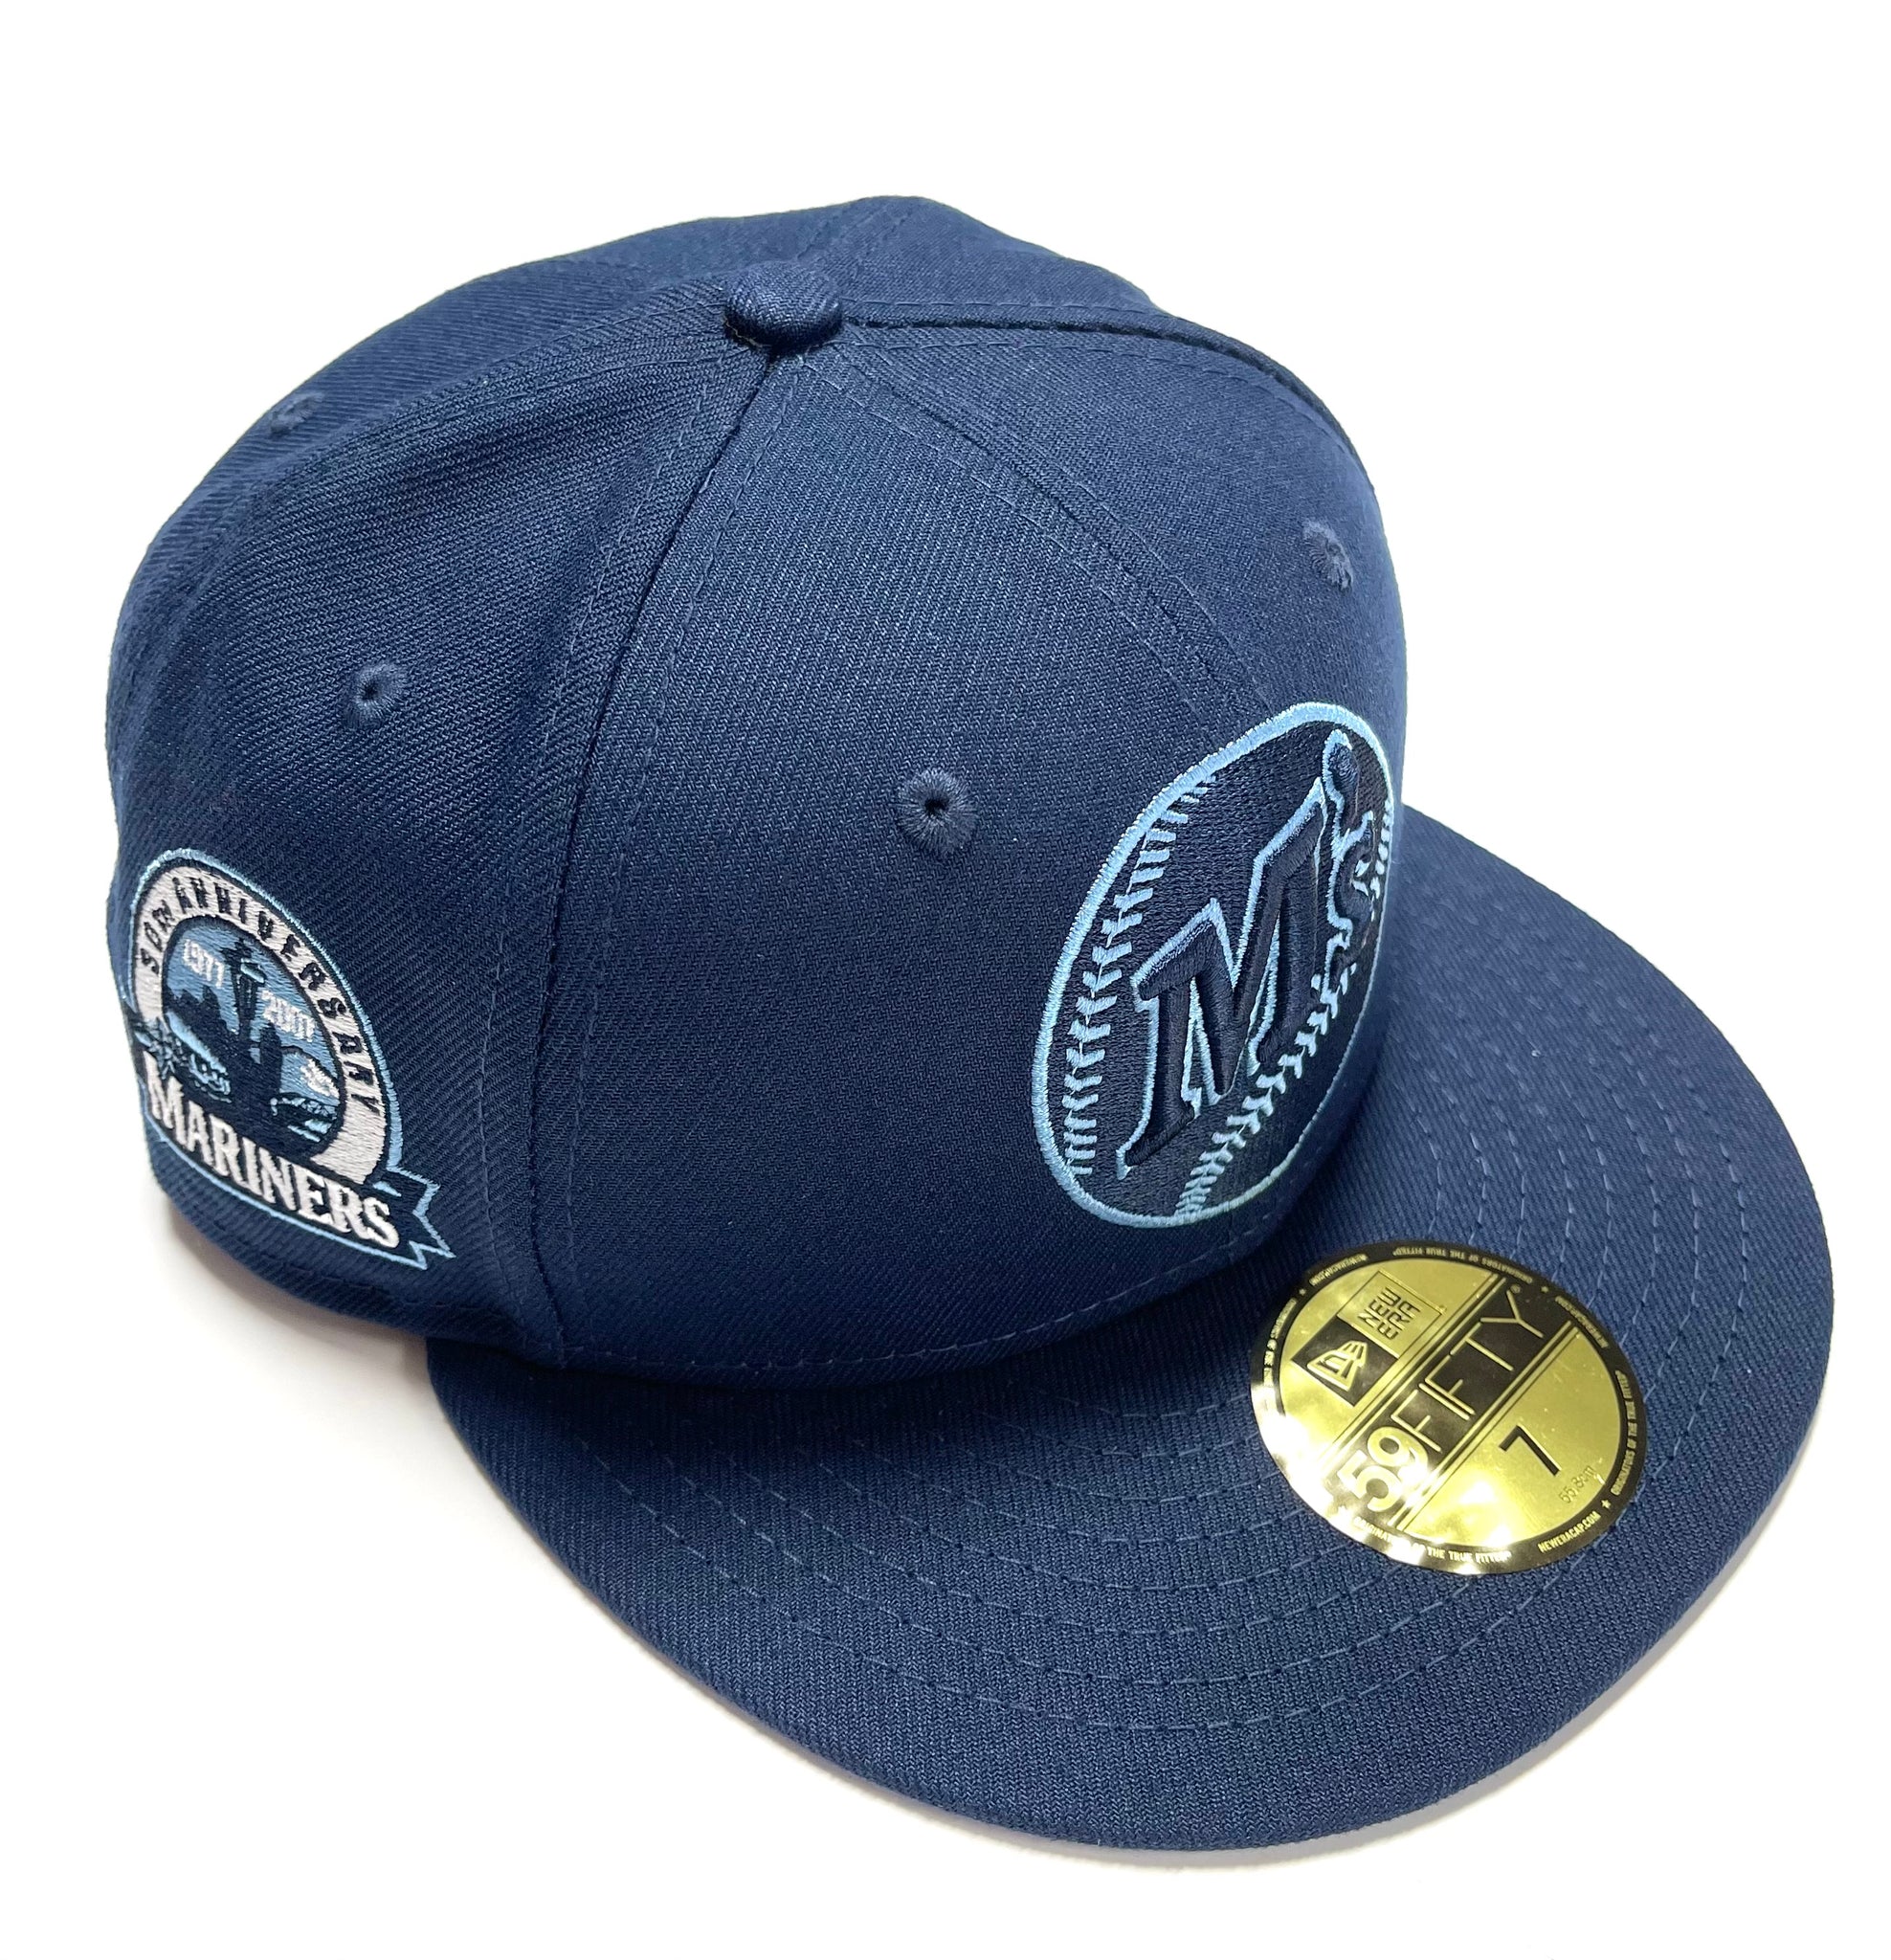 NEW ERA CHASING M'S SEATTLE MARINERS FITTED HAT (OCEAN BLUE